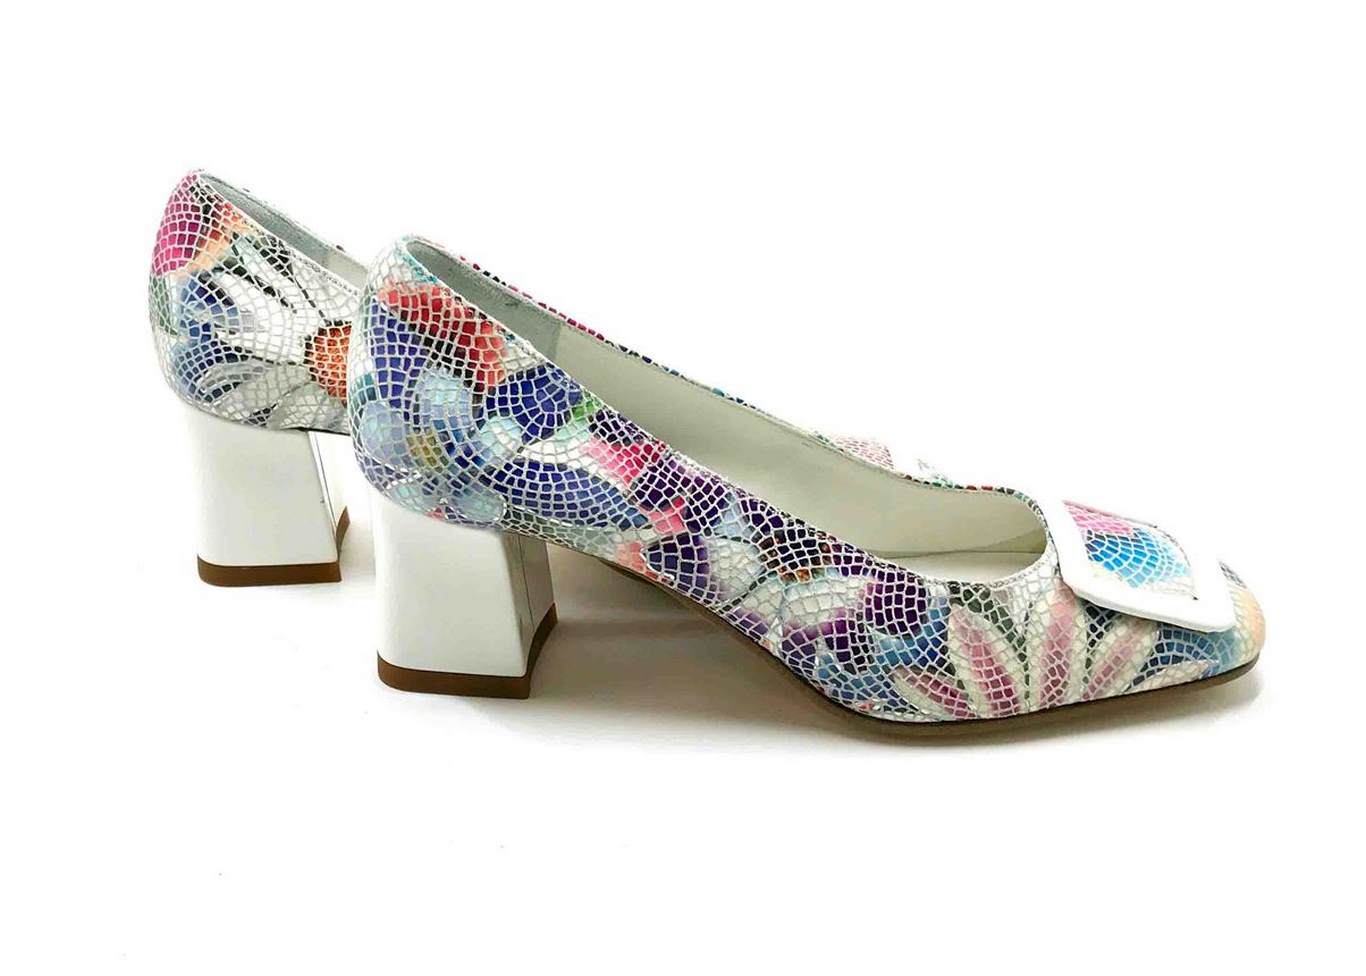 Décolleté Heel 5cm upper in Leather silkscreened Lawn White, heel and buckle in White calfskin